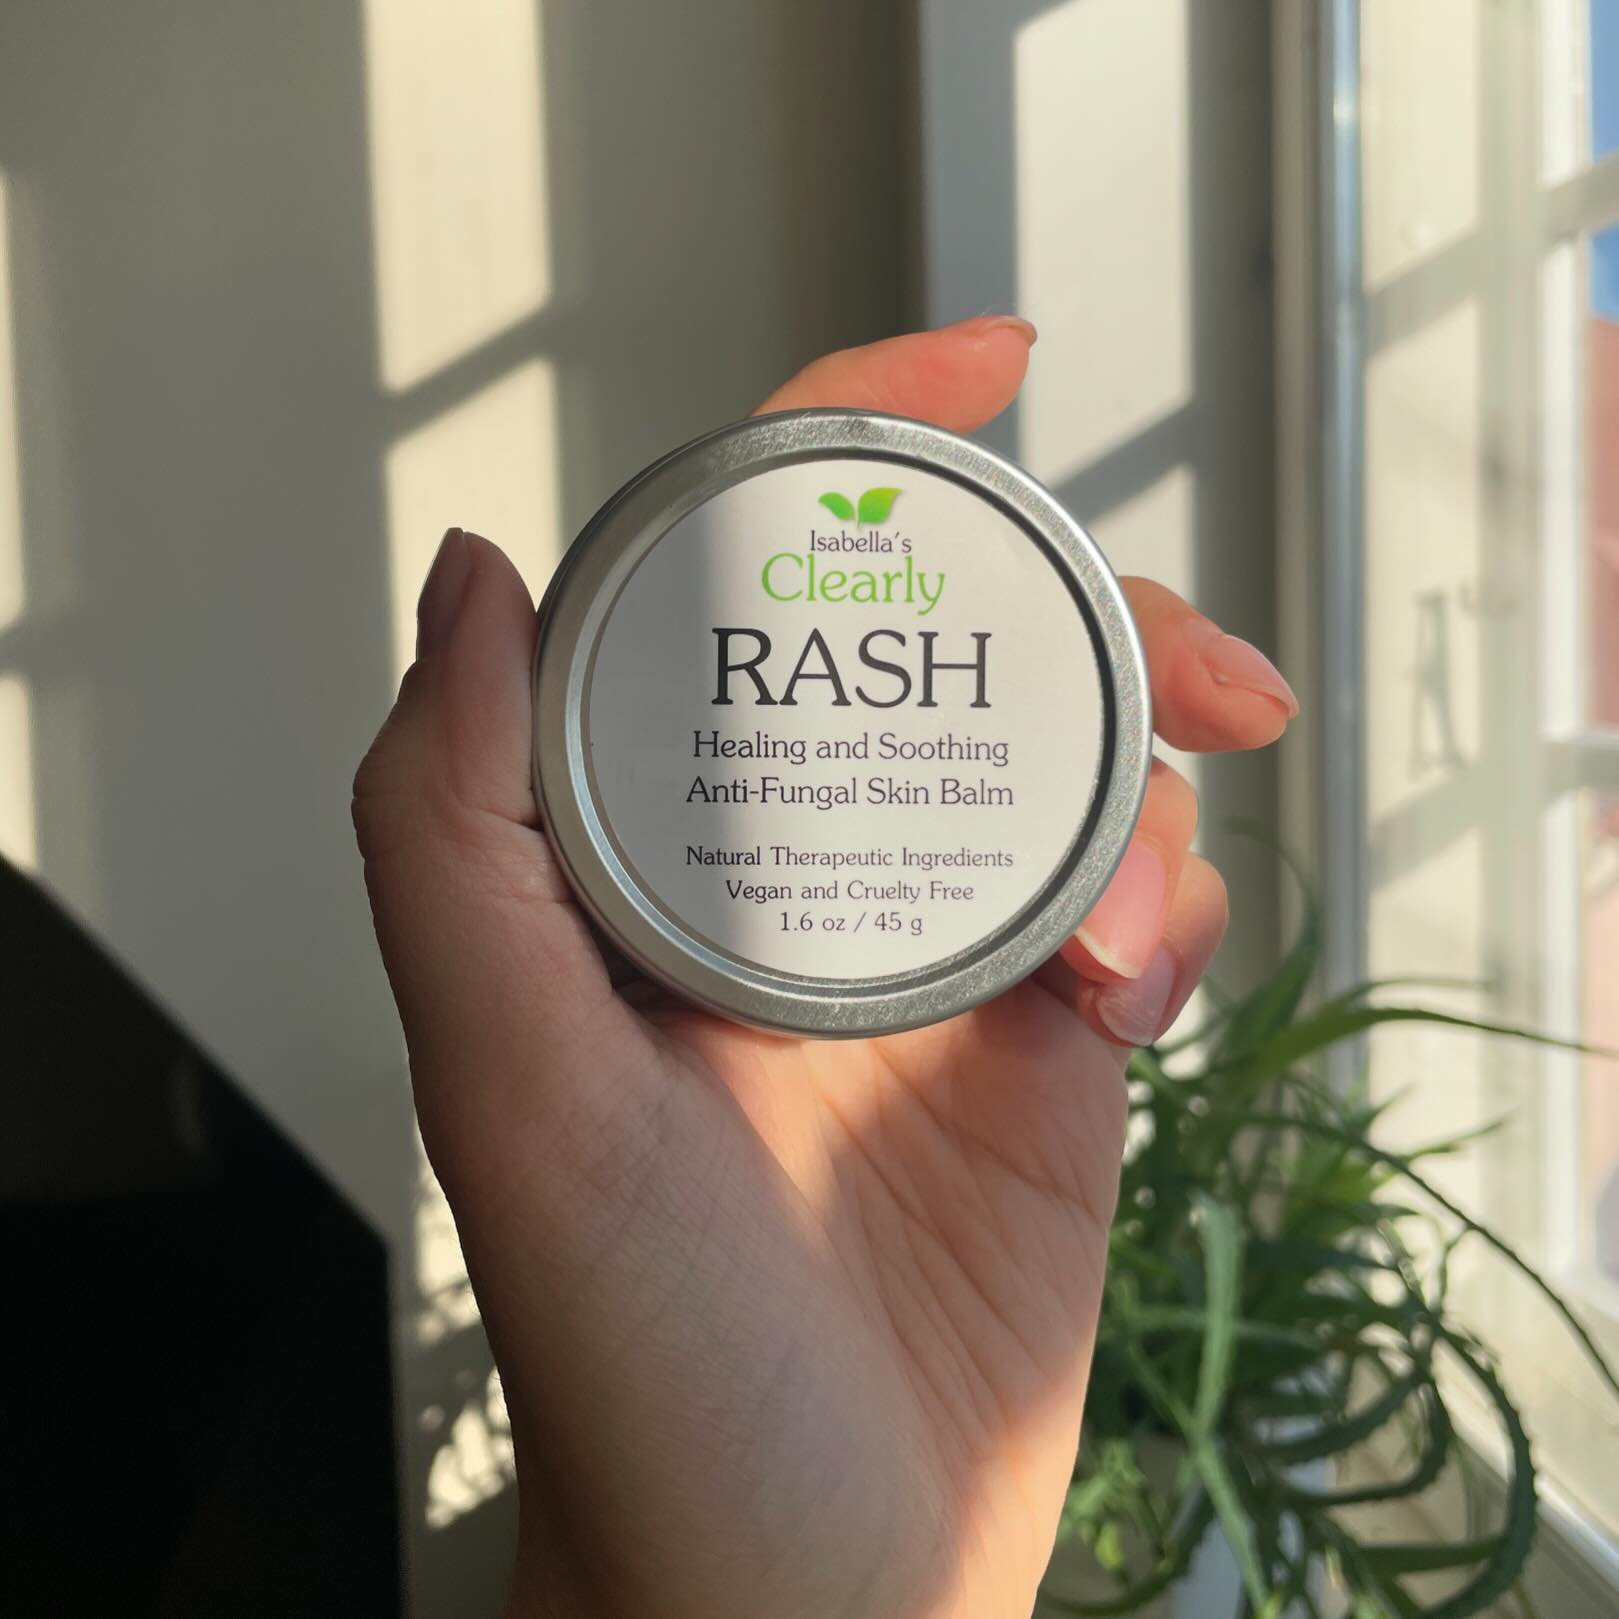 As much as we love springtime, it brings us&hellip;allergies🙂&zwj;&harr;️ but WE got you covered! Clearly RASH is a healing balm made with nature&rsquo;s best ingredients to provide a natural solution to skin rashes and infections. 🌱 

Check out al